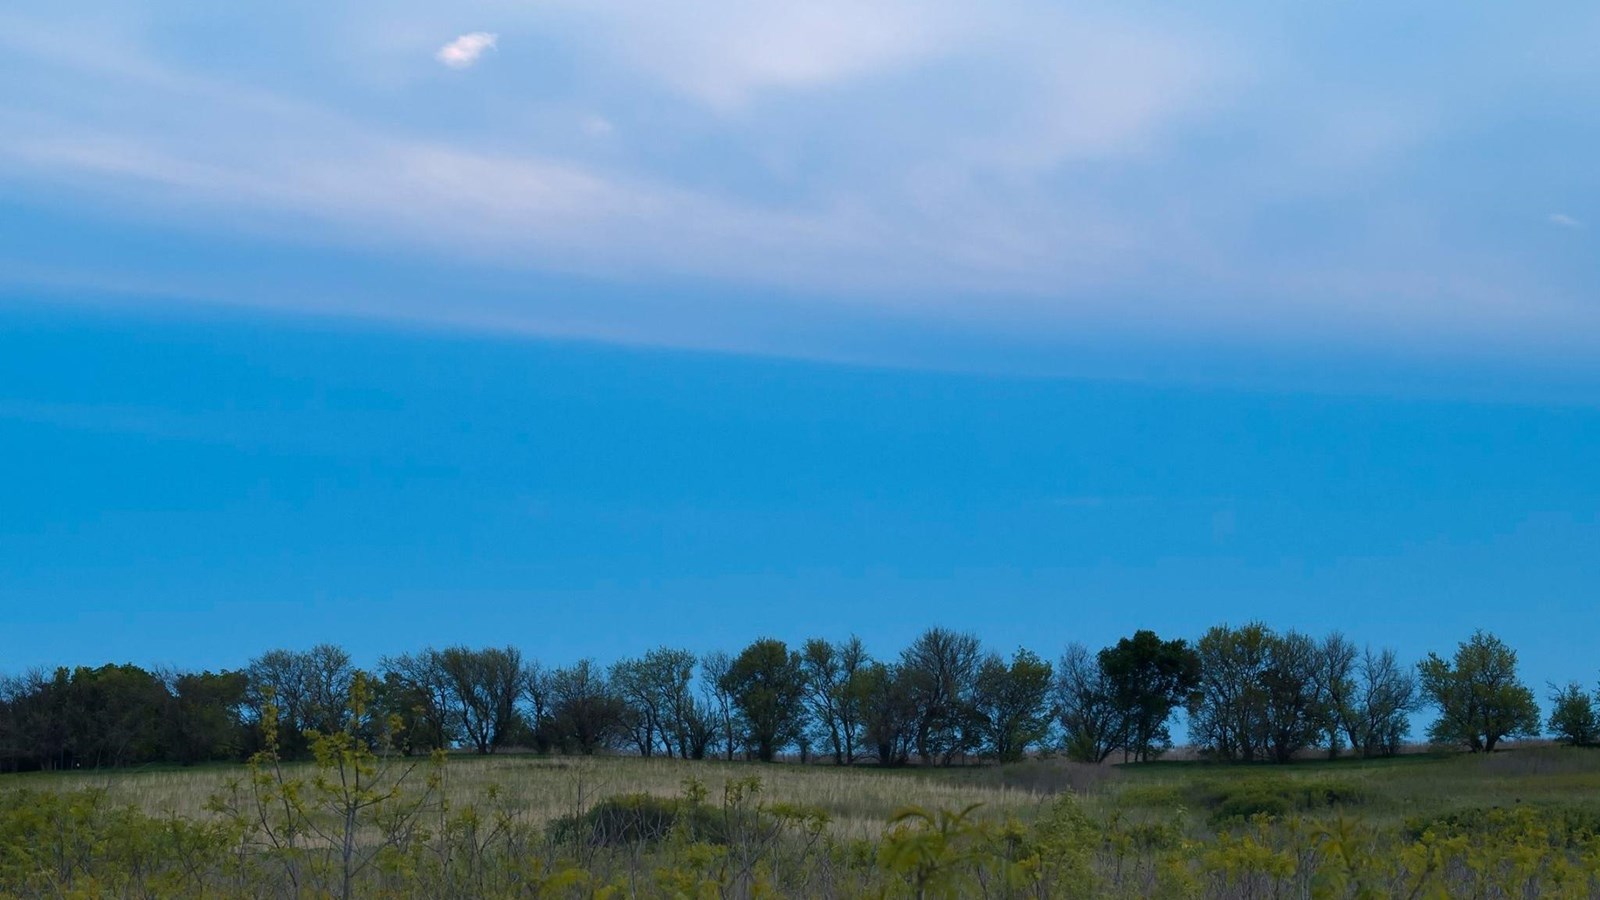 A treeline separates the tallgrass prairie from the blue sky in the late evening. 